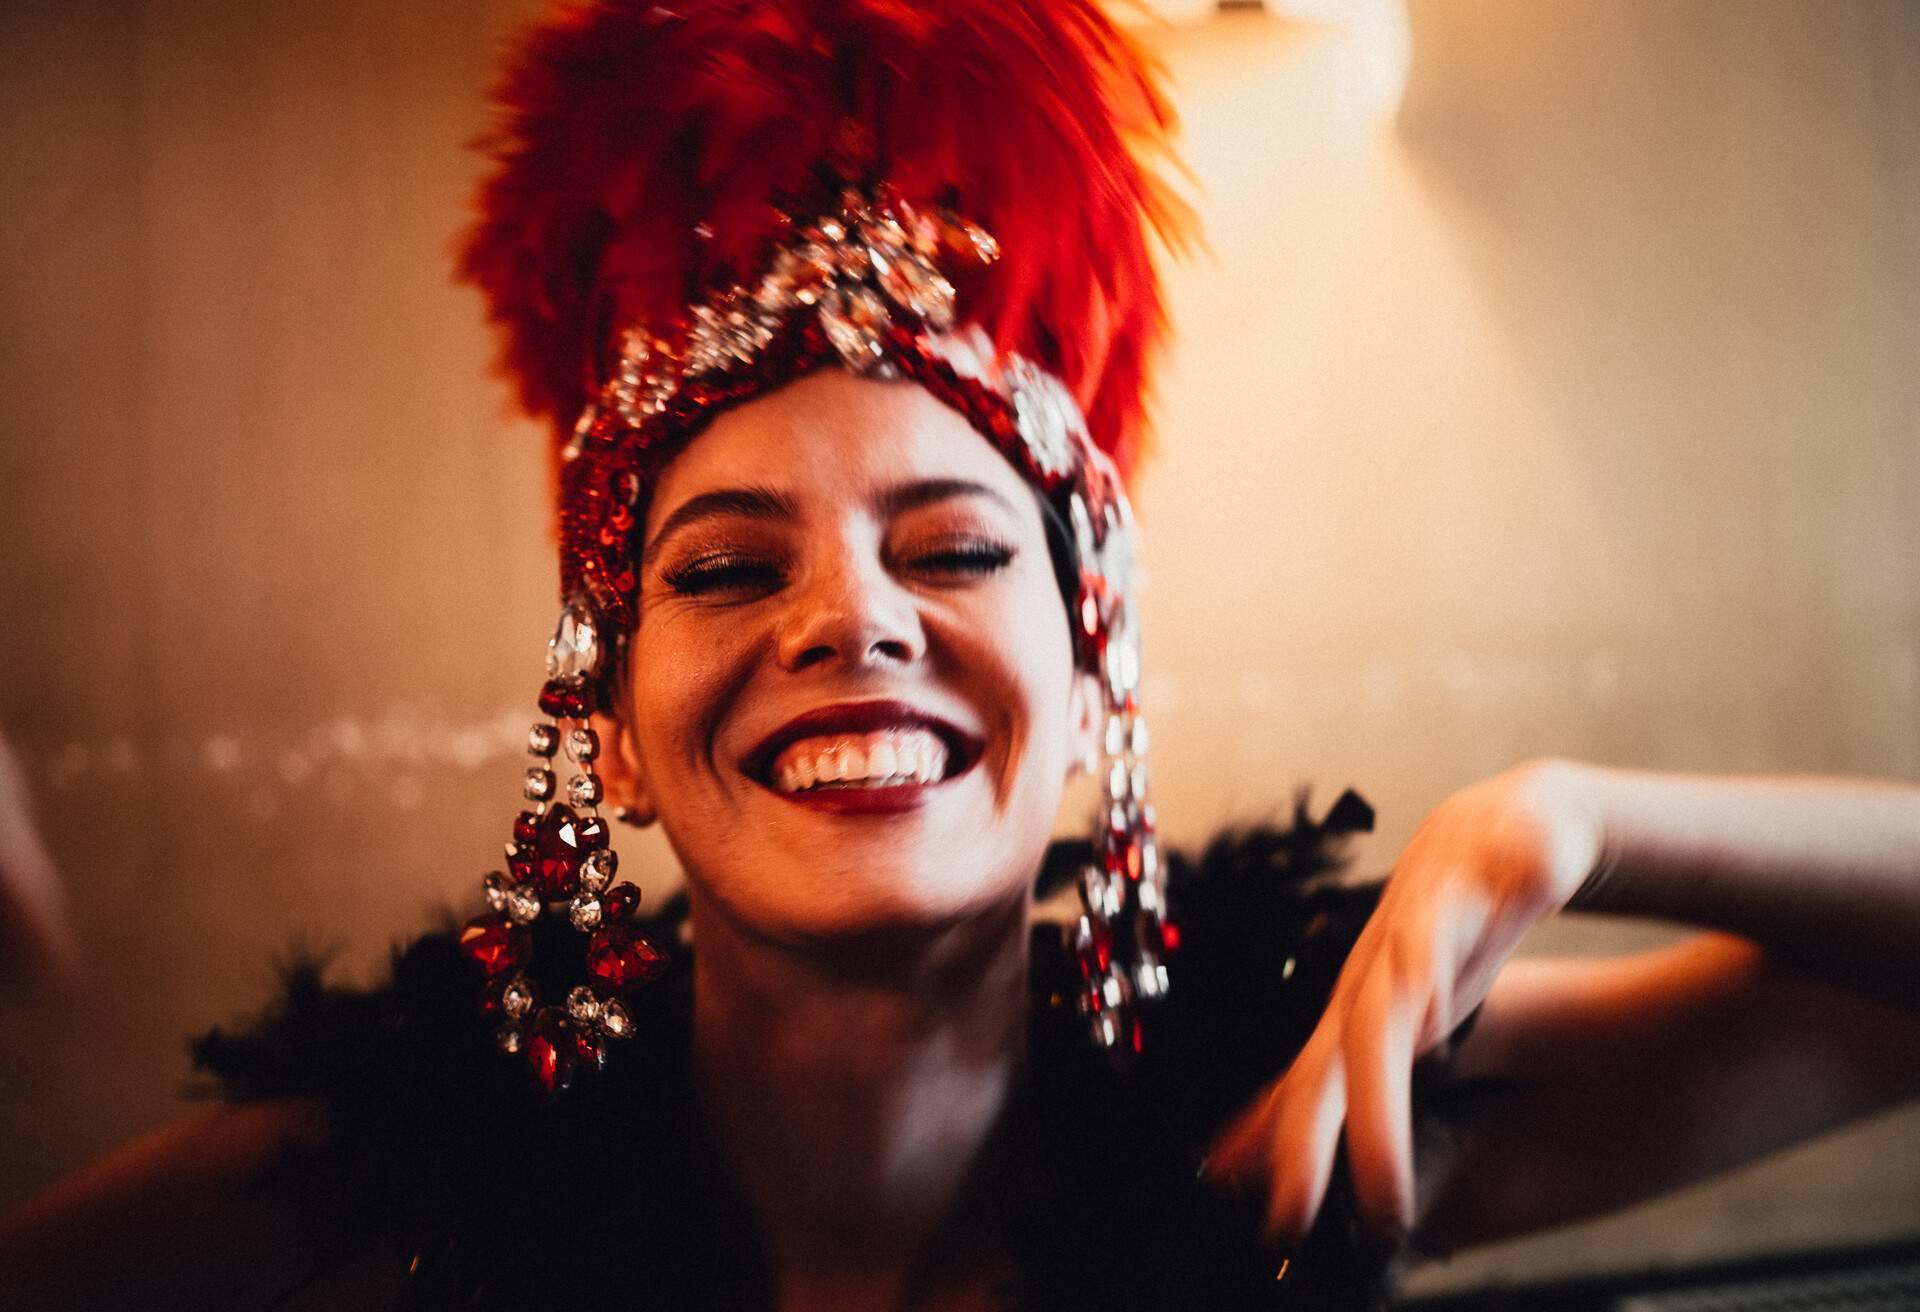 Cabaret, beauty, cute, vintage, art, nightlife, close-up, fun, backstage, young woman, bizarre, funky, laughing, portrait, variety,